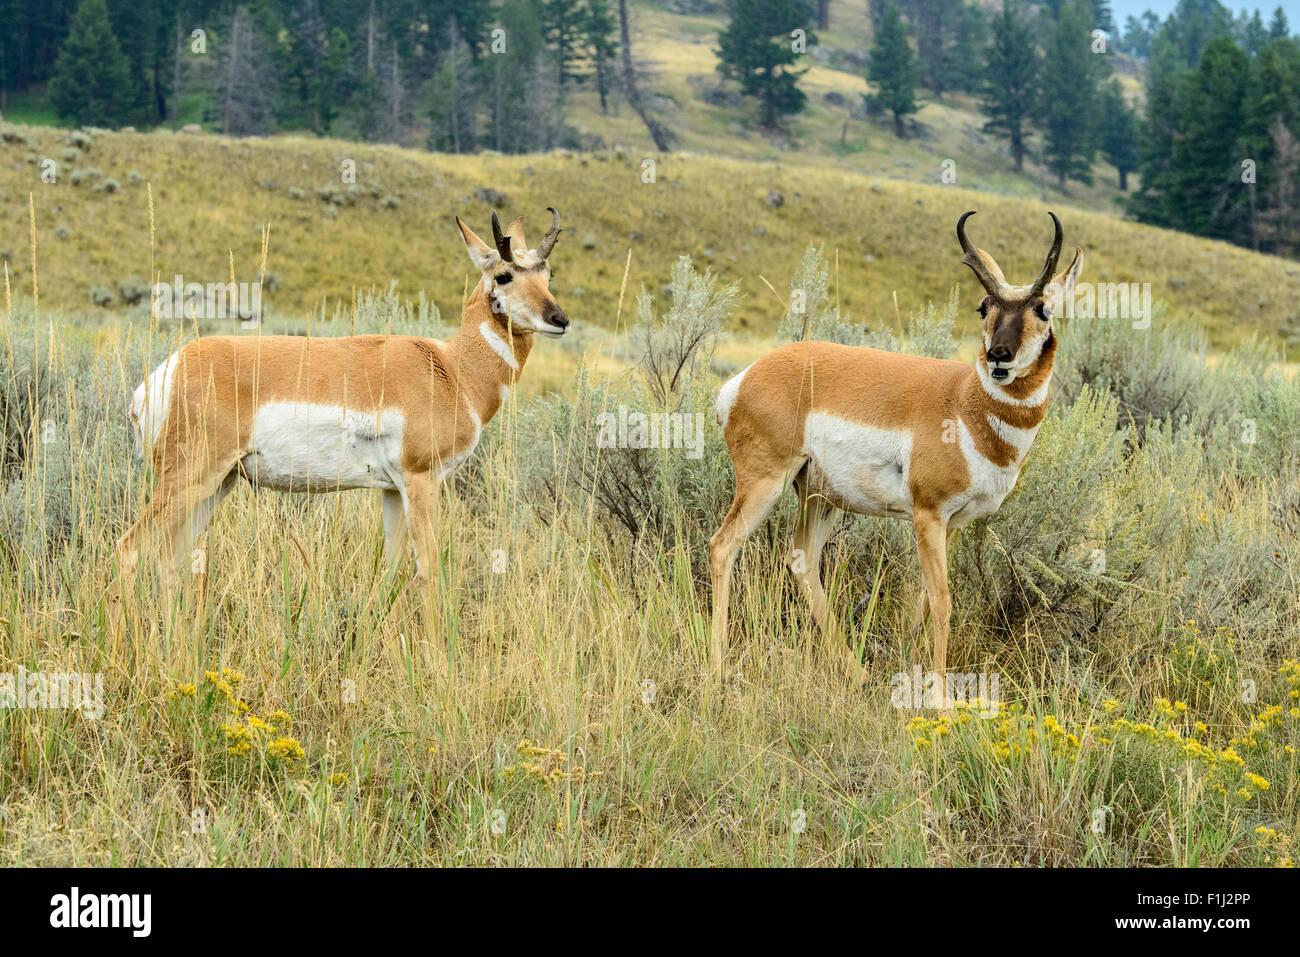 Photograph of a Pronghorn Antelope at Yellowstone National Park, Wyoming Stock Photo